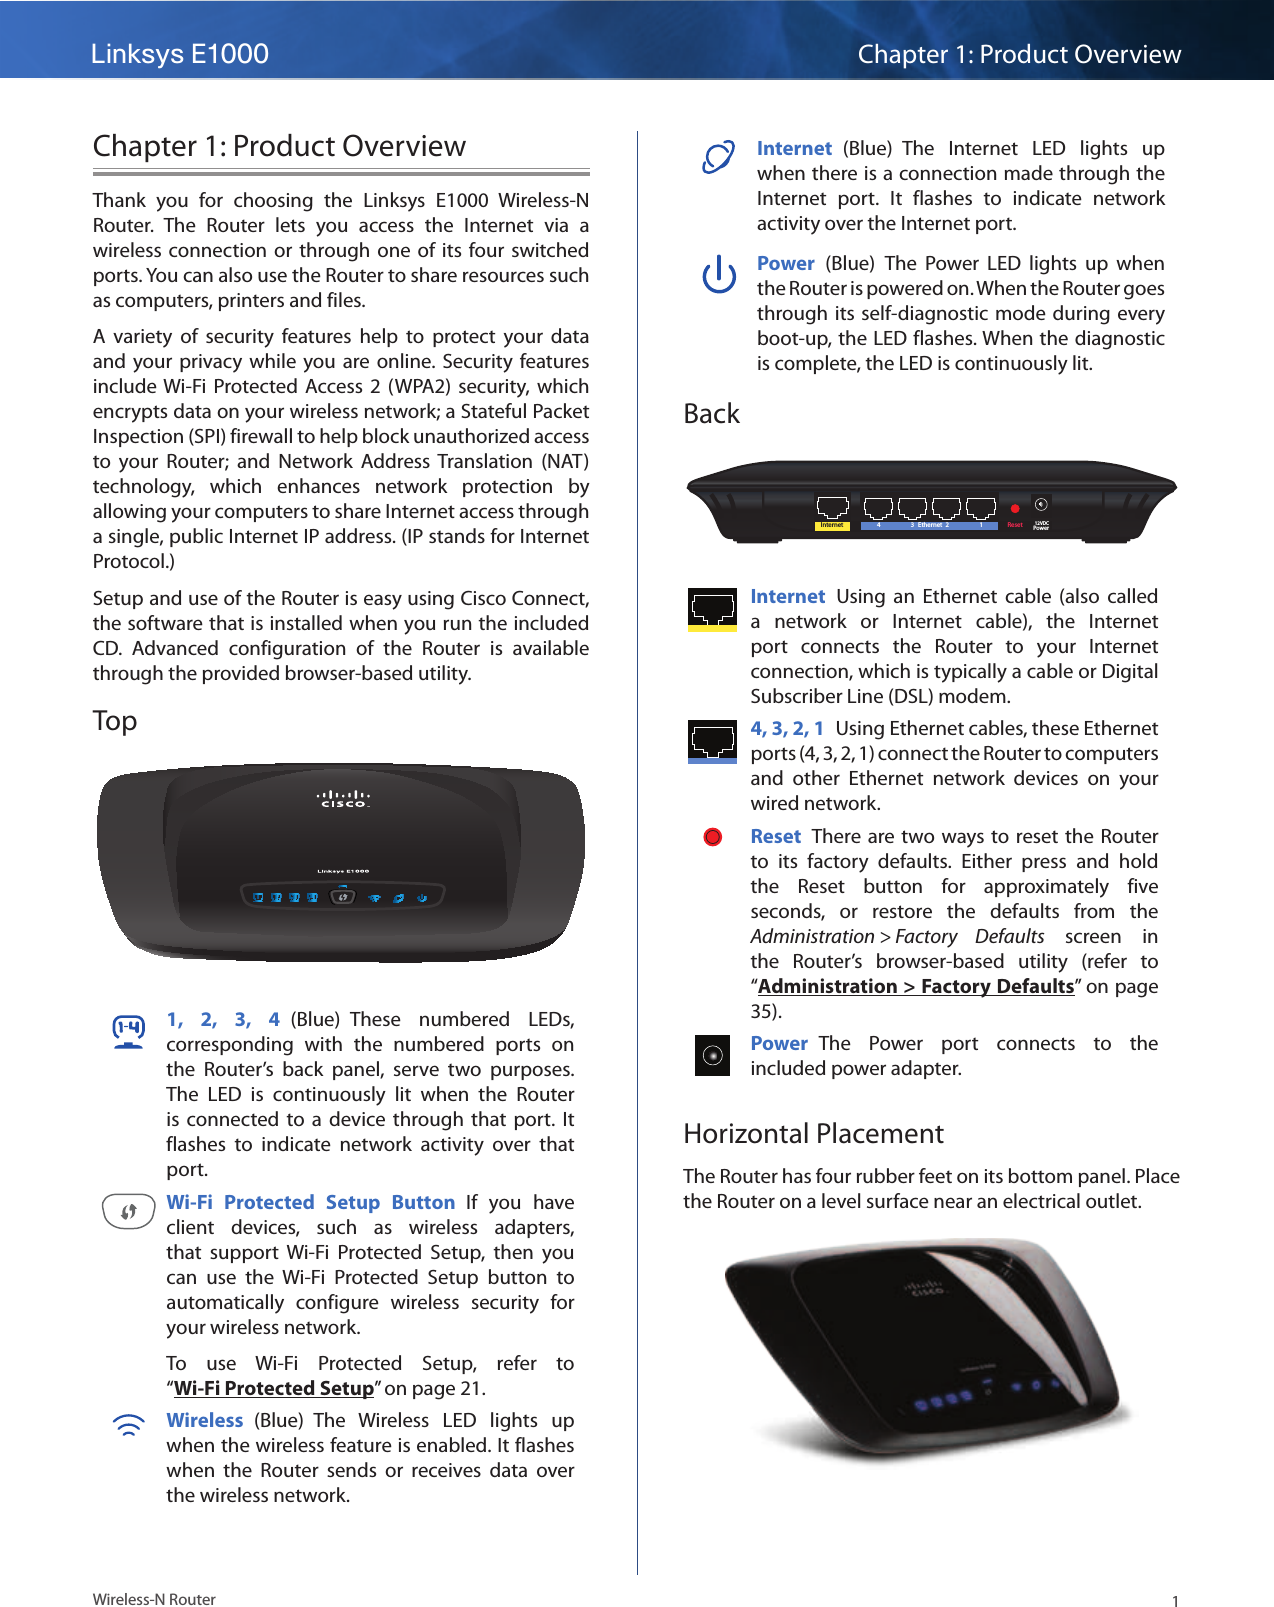 Linksys E1000 Chapter 1: Product Overview1Wireless-N RouterChapter 1: Product OverviewThank  you  for  choosing  the  Linksys  E1000  Wireless-N Router.  The  Router  lets  you  access  the  Internet  via  a wireless connection  or through  one of  its four switched ports. You can also use the Router to share resources such as computers, printers and files. A  variety  of  security  features  help  to  protect  your  data and  your  privacy  while you  are online. Security features include Wi-Fi Protected Access  2 (WPA2)  security,  which encrypts data on your wireless network; a Stateful Packet Inspection (SPI) firewall to help block unauthorized access to  your  Router;  and  Network  Address  Translation  (NAT) technology,  which  enhances  network  protection  by allowing your computers to share Internet access through a single, public Internet IP address. (IP stands for Internet Protocol.)Setup and use of the Router is easy using Cisco Connect, the software that is installed when you run the included CD.  Advanced  configuration  of  the  Router  is  available through the provided browser-based utility.Top1,  2,  3,  4  (Blue)  These  numbered  LEDs, corresponding  with  the  numbered  ports  on the  Router’s  back  panel,  serve  two  purposes. The  LED  is  continuously  lit  when  the  Router is  connected  to a  device  through that  port.  It flashes  to  indicate  network  activity  over  that port. Wi-Fi  Protected  Setup  Button  If  you  have client  devices,  such  as  wireless  adapters, that  support  Wi-Fi  Protected  Setup,  then  you can  use  the  Wi-Fi  Protected  Setup  button  to automatically  configure  wireless  security  for your wireless network.To  use  Wi-Fi  Protected  Setup,  refer  to “Wi-Fi Protected Setup” on page 21.Wireless  (Blue)  The  Wireless  LED  lights  up when the wireless feature is enabled. It flashes when  the  Router  sends  or  receives  data  over the wireless network.Internet  (Blue)  The  Internet  LED  lights  up when there is a connection made through the Internet  port.  It  flashes  to  indicate  network activity over the Internet port. Power  (Blue)  The  Power  LED  lights  up  when the Router is powered on. When the Router goes through its  self-diagnostic mode during  every boot-up, the LED flashes. When the diagnostic is complete, the LED is continuously lit.BackInternet Ethernet4 3 2 1 Reset Power12VDCInternet  Using  an  Ethernet  cable  (also  called a  network  or  Internet  cable),  the  Internet port  connects  the  Router  to  your  Internet connection, which is typically a cable or Digital Subscriber Line (DSL) modem. 4, 3, 2, 1  Using Ethernet cables, these Ethernet ports (4, 3, 2, 1) connect the Router to computers and  other  Ethernet  network  devices  on  your wired network. Reset  There are two ways to  reset the  Router to  its  factory  defaults.  Either  press  and  hold the  Reset  button  for  approximately  five seconds,  or  restore  the  defaults  from  the Administration &gt; Factory  Defaults  screen  in the  Router’s  browser-based  utility  (refer  to “Administration &gt; Factory Defaults” on page 35).Power  The  Power  port  connects  to  the included power adapter.Horizontal PlacementThe Router has four rubber feet on its bottom panel. Place the Router on a level surface near an electrical outlet.